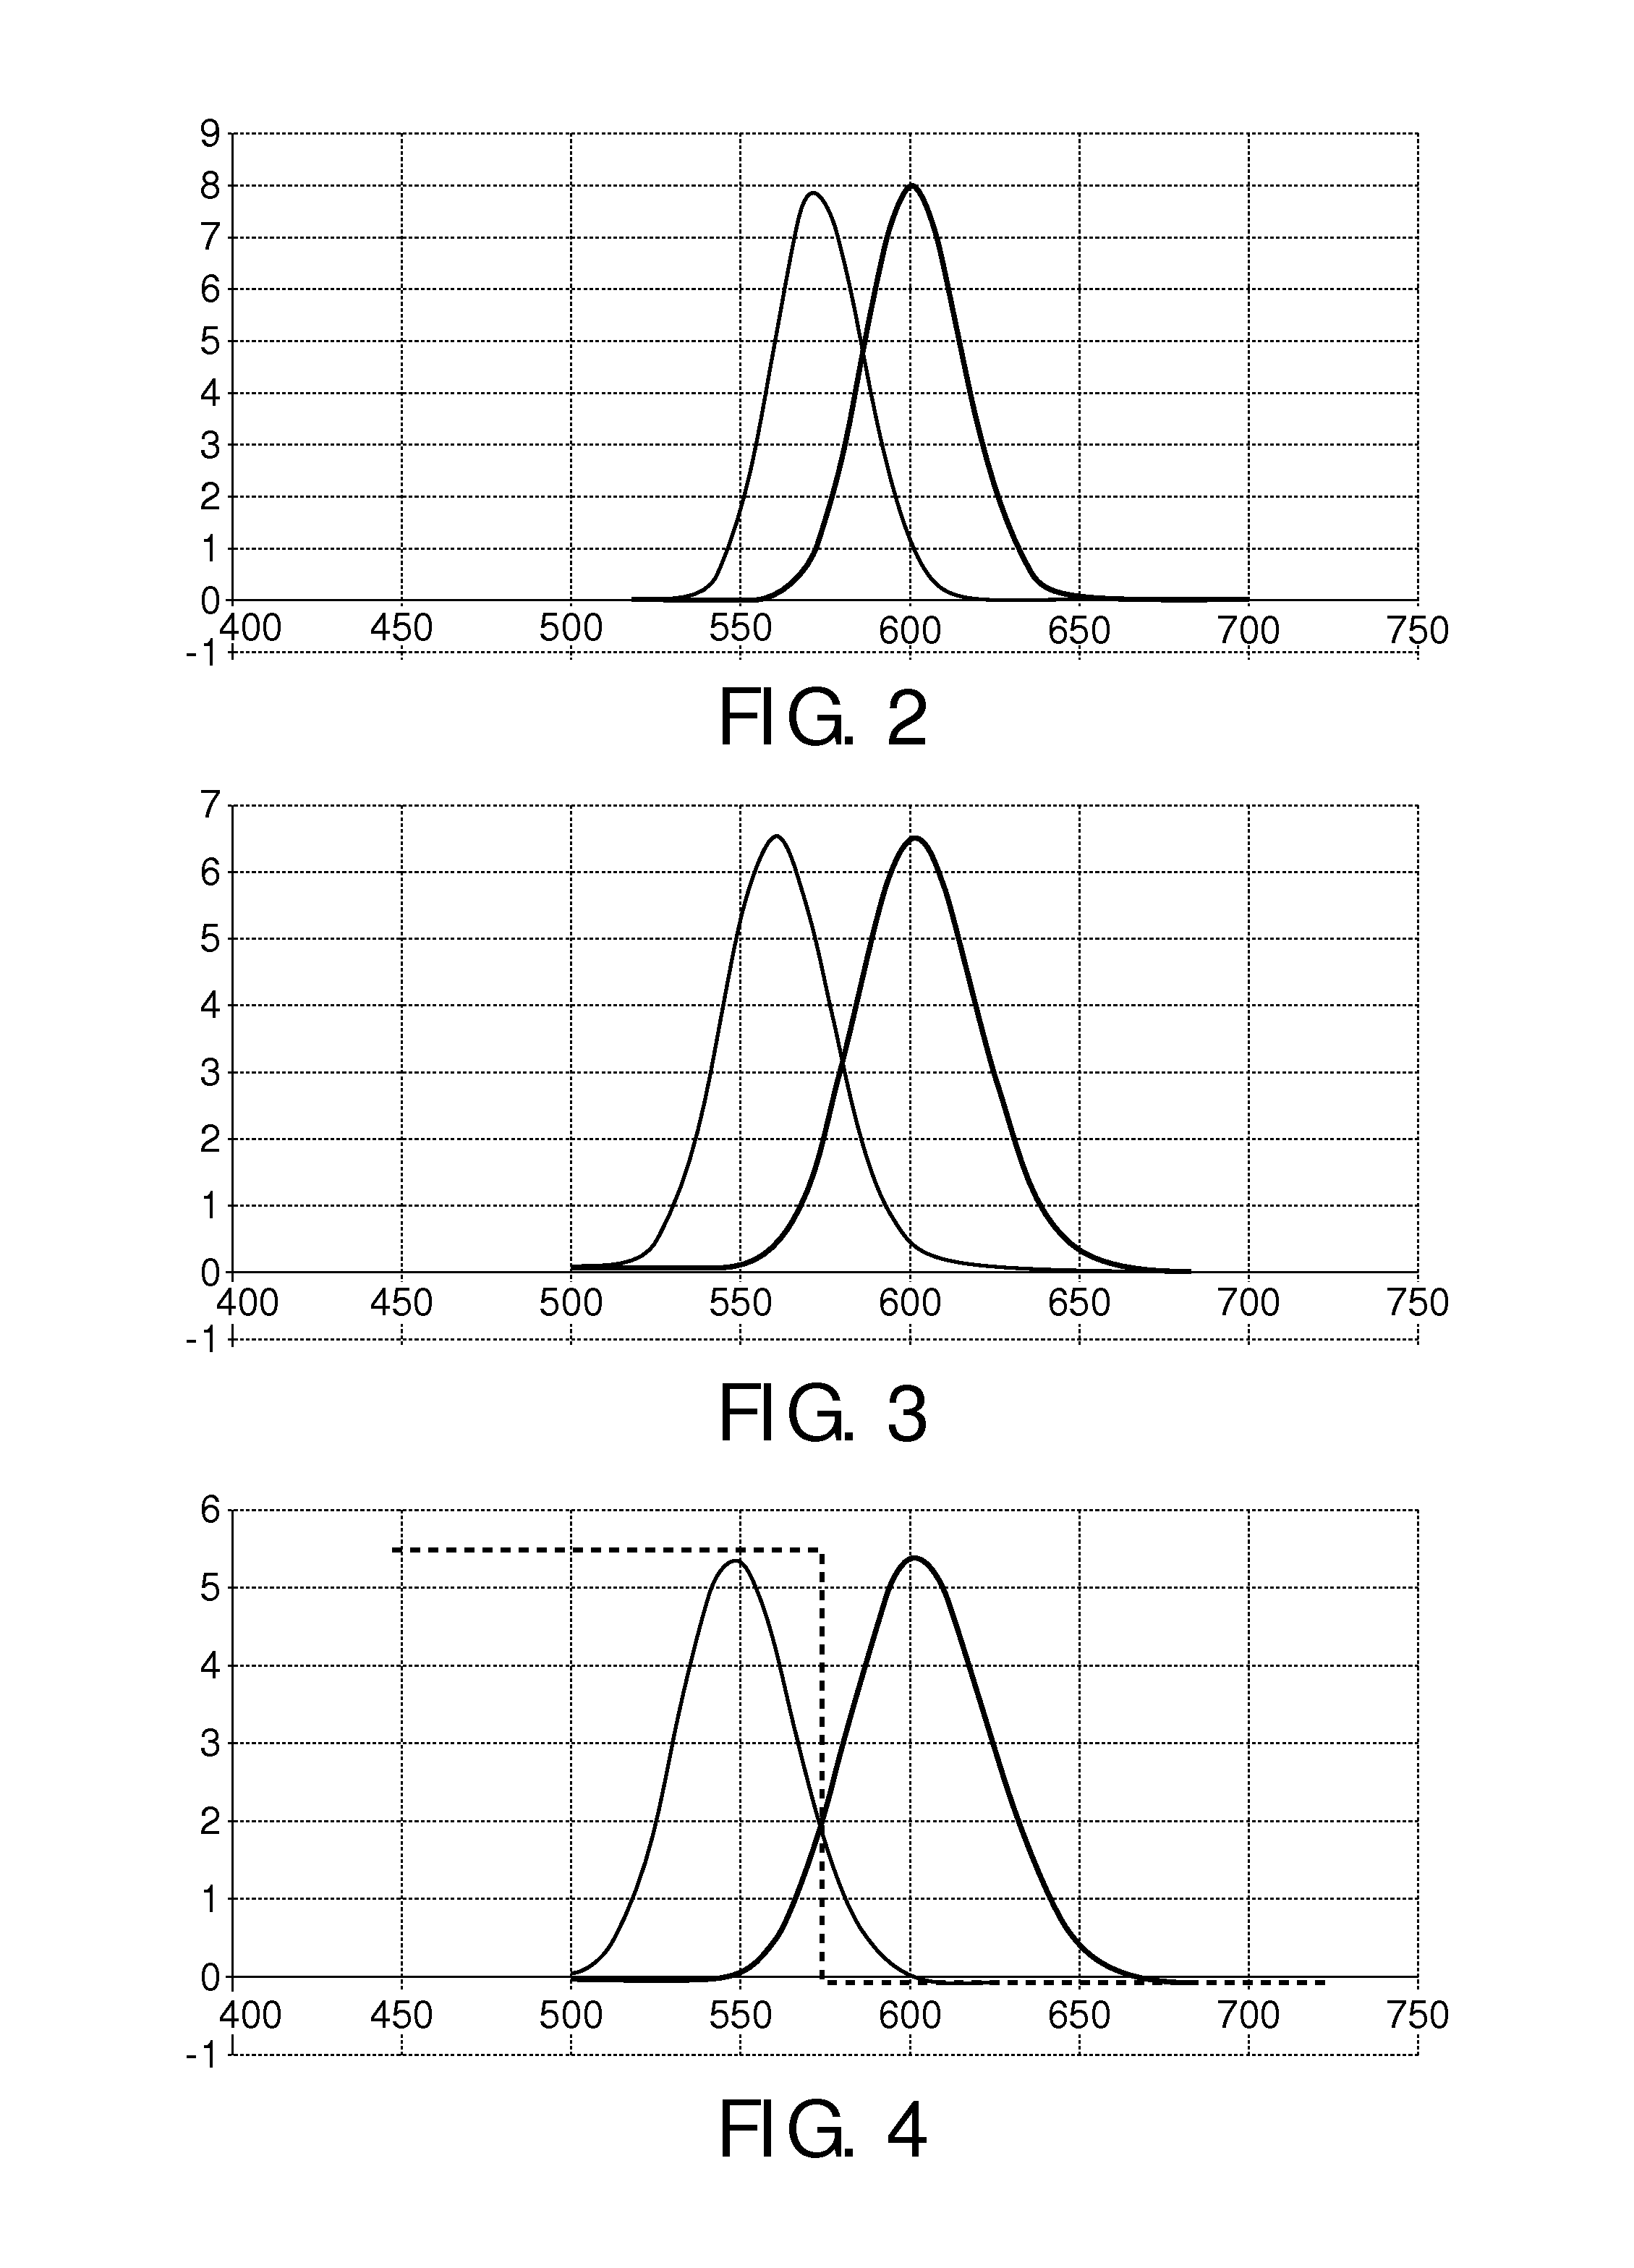 Illumination system with light source, radiation converting element and filter